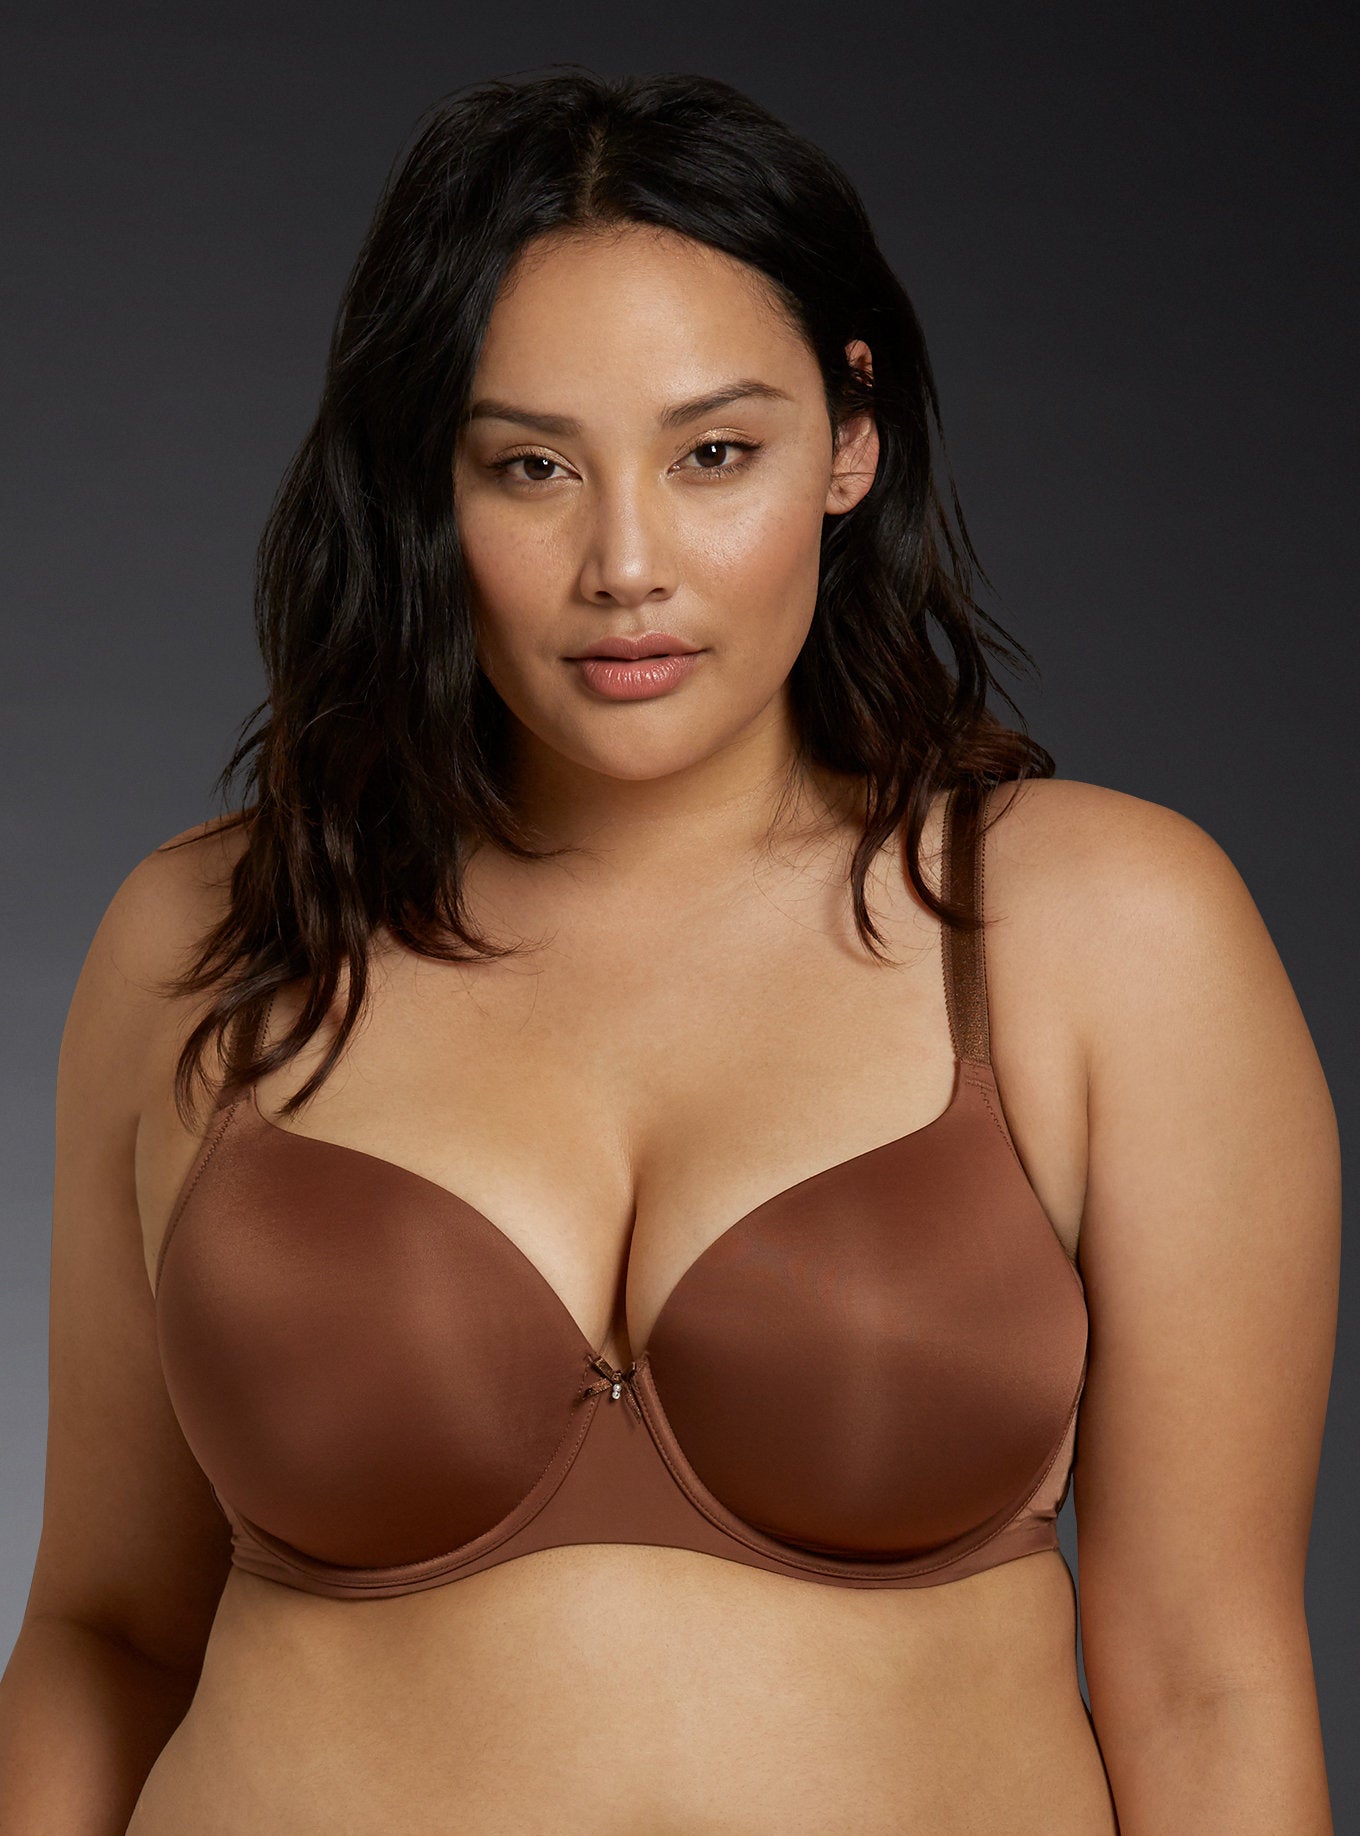 Curvy Girls, These Life-Changing Bras Are on Sale for $40
